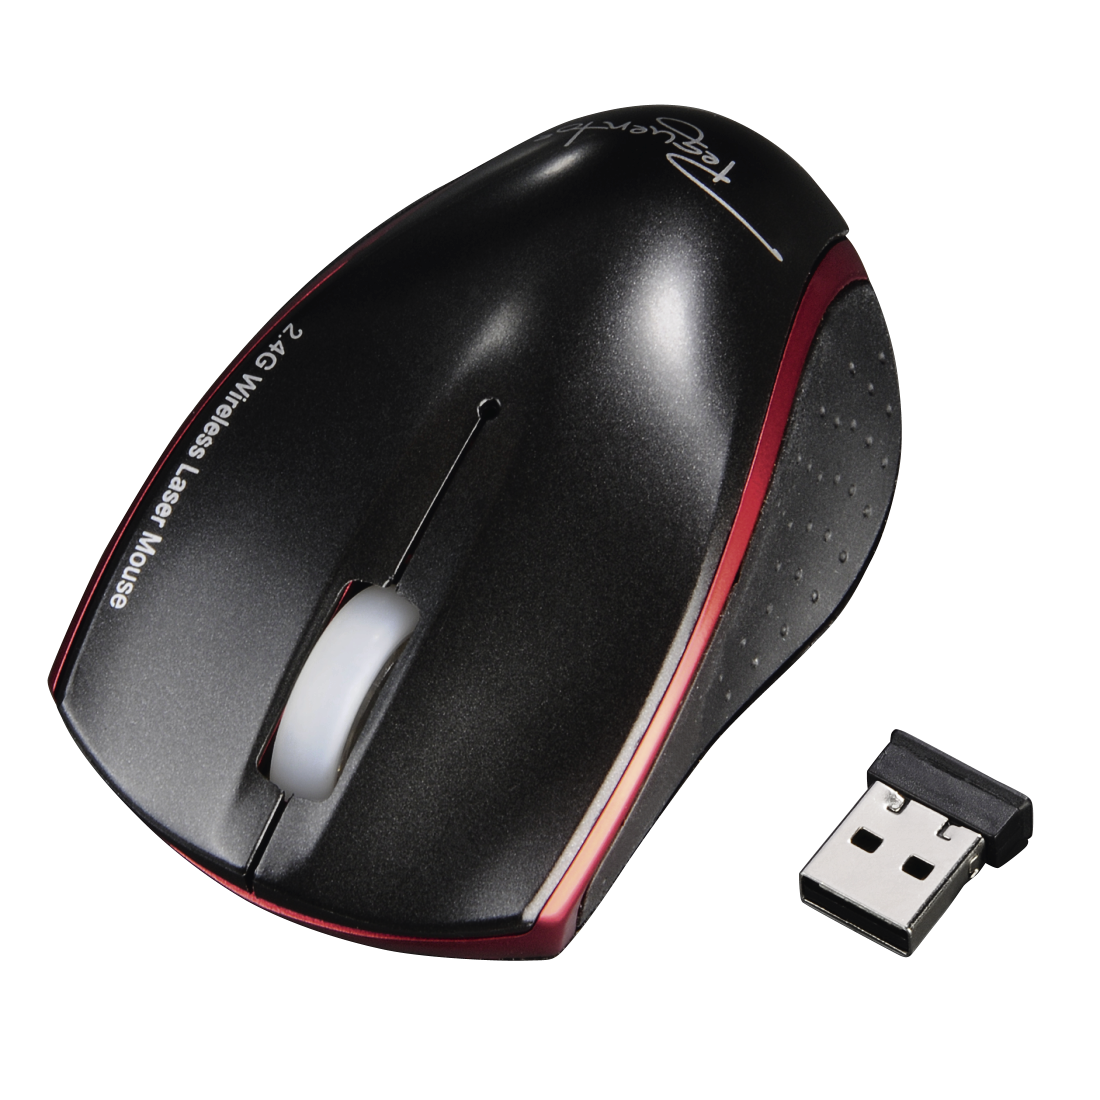 00053875 Hama "Pequento²" Wireless Laser Mouse, black/red